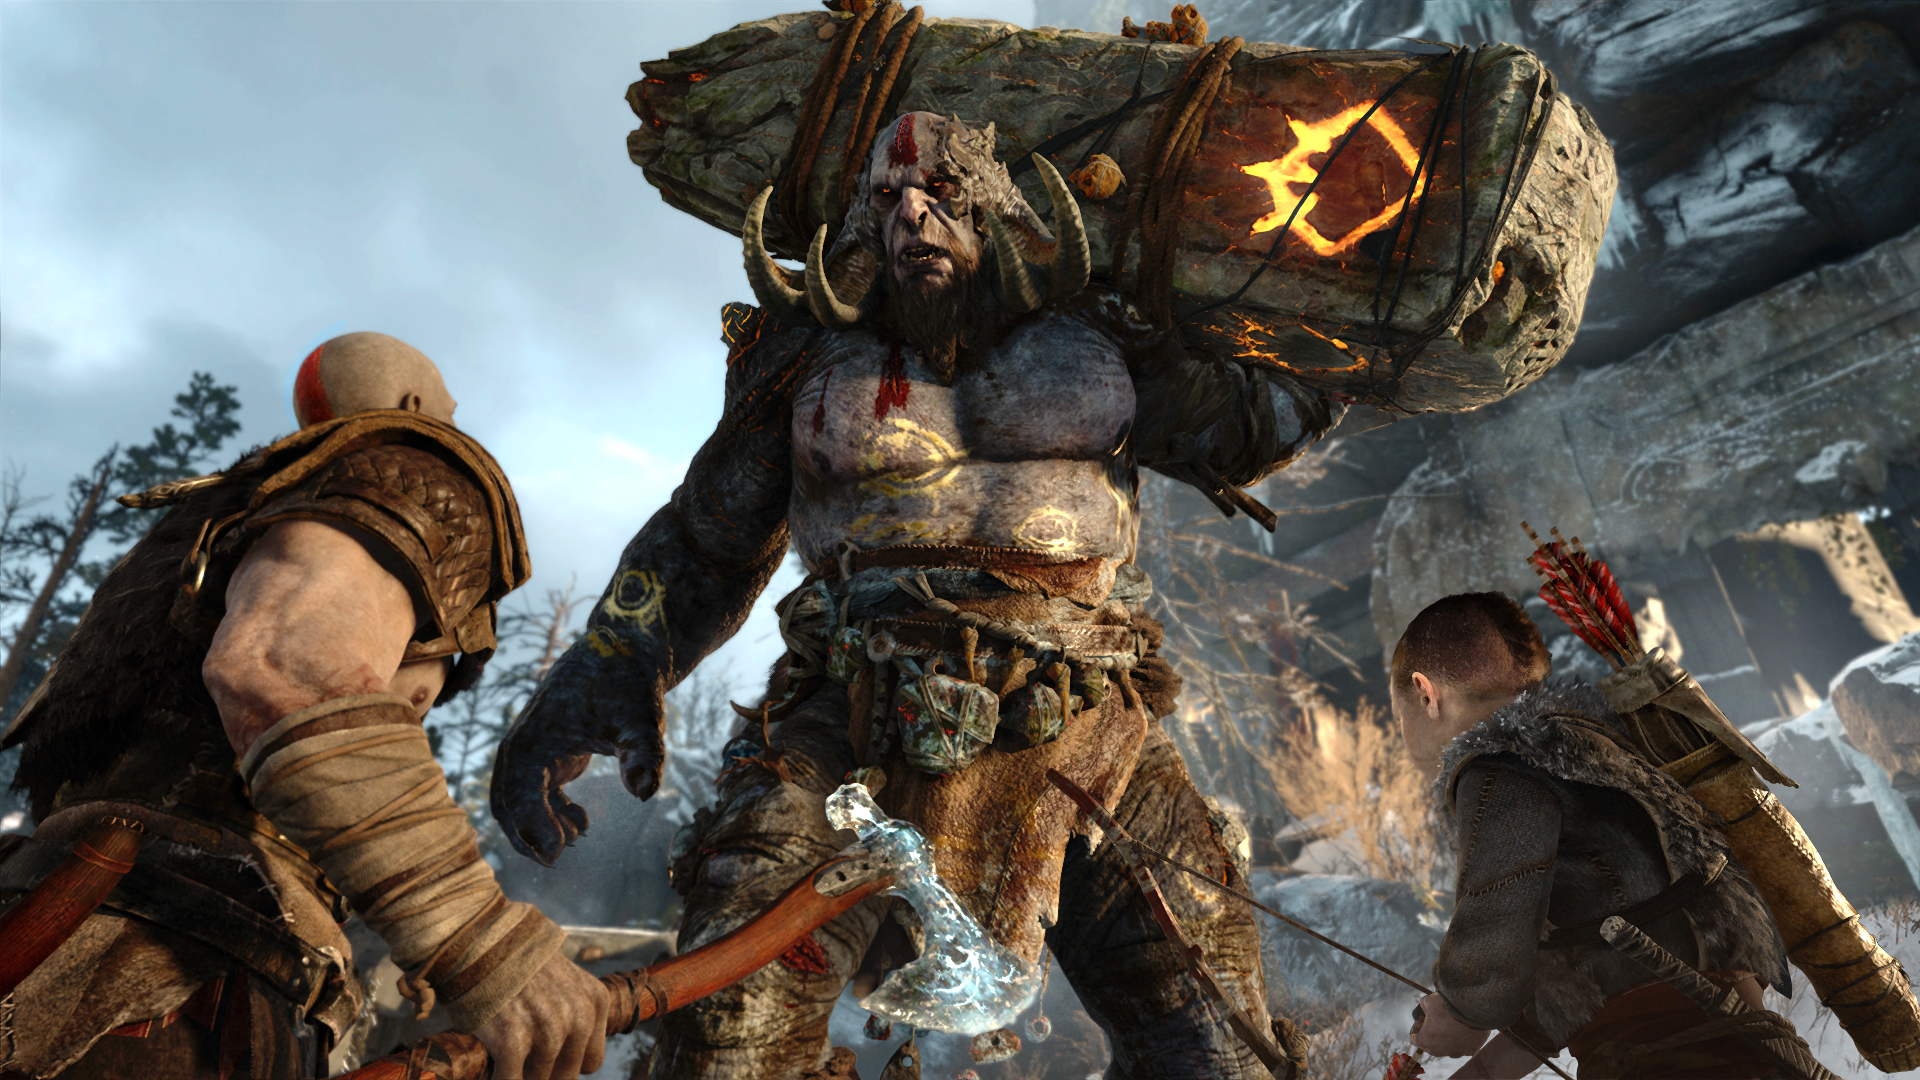 Kratos and Atreus fighting a troll in God of War